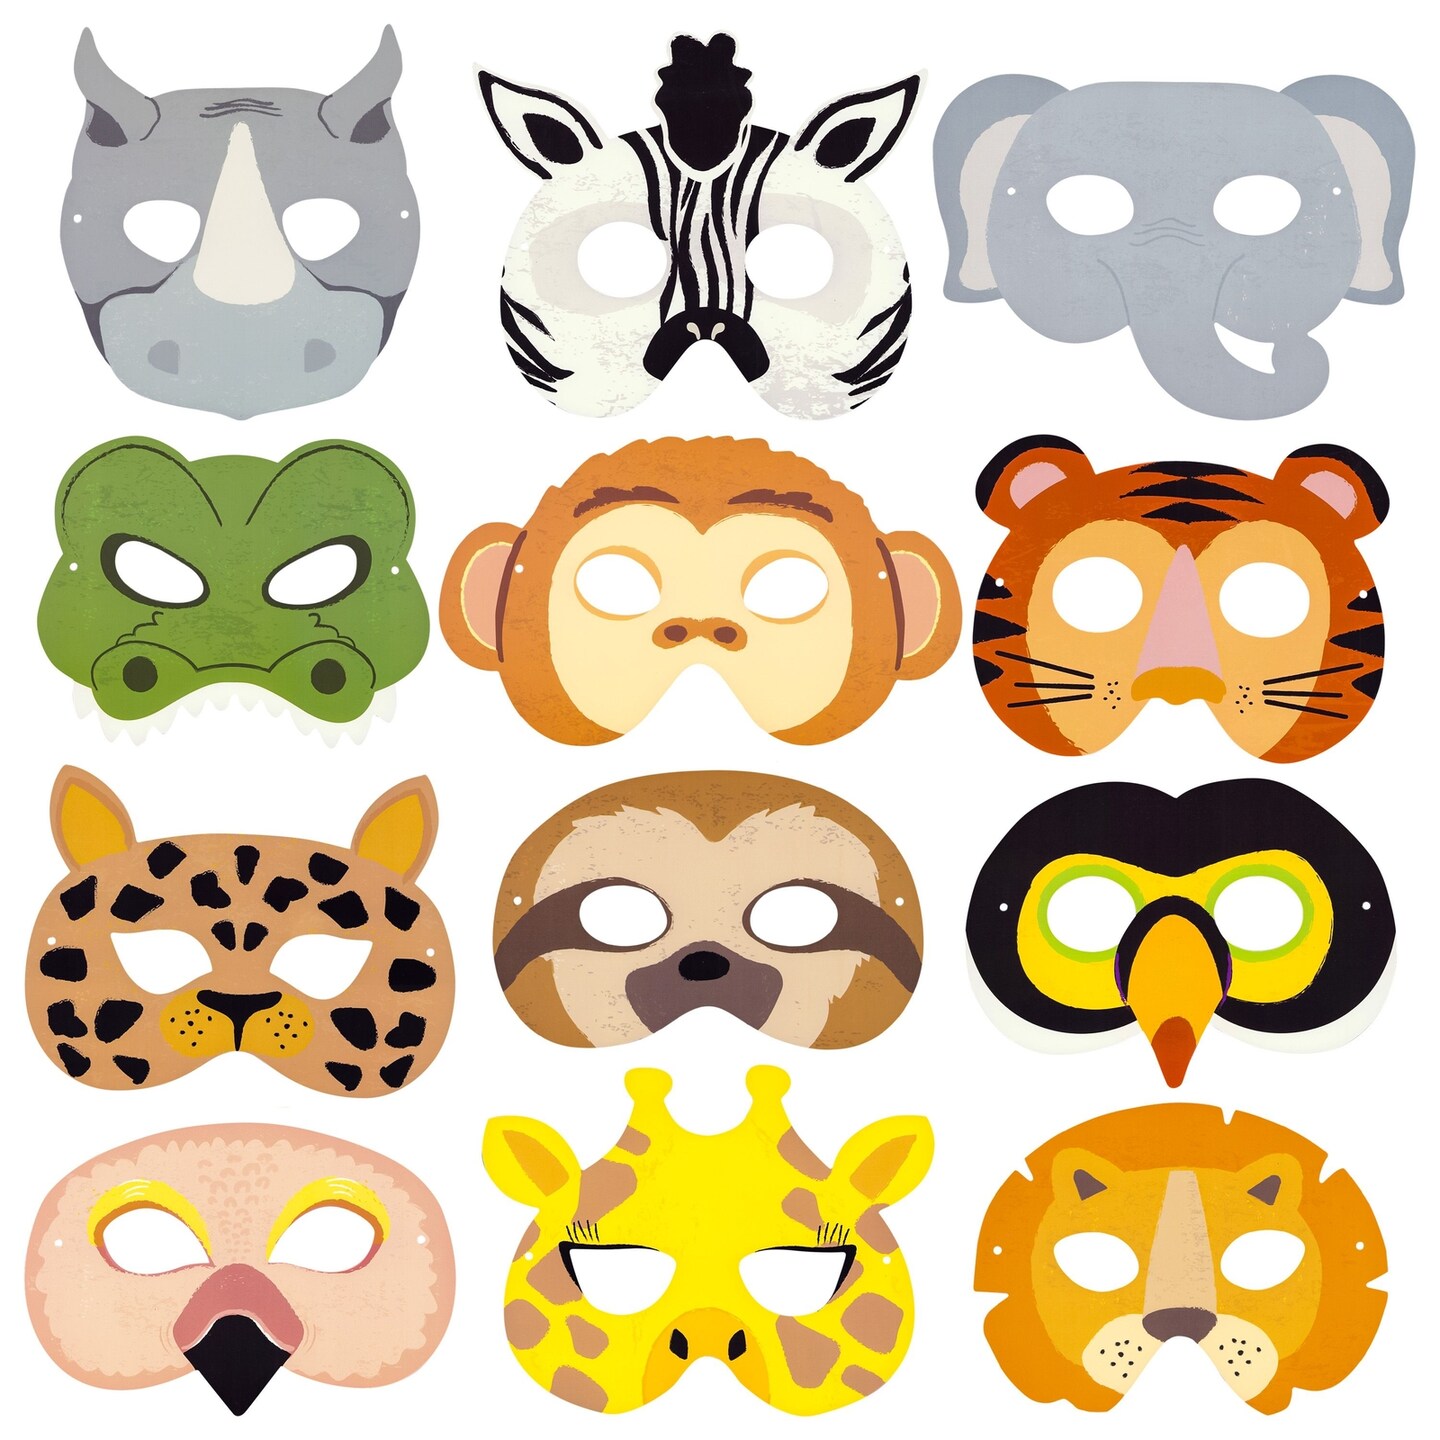 24 Pack Safari Themed Birthday Photo Booth Props, Eye Coverings for Party Favors, Costumes, Dress Up (7 x 5 In)